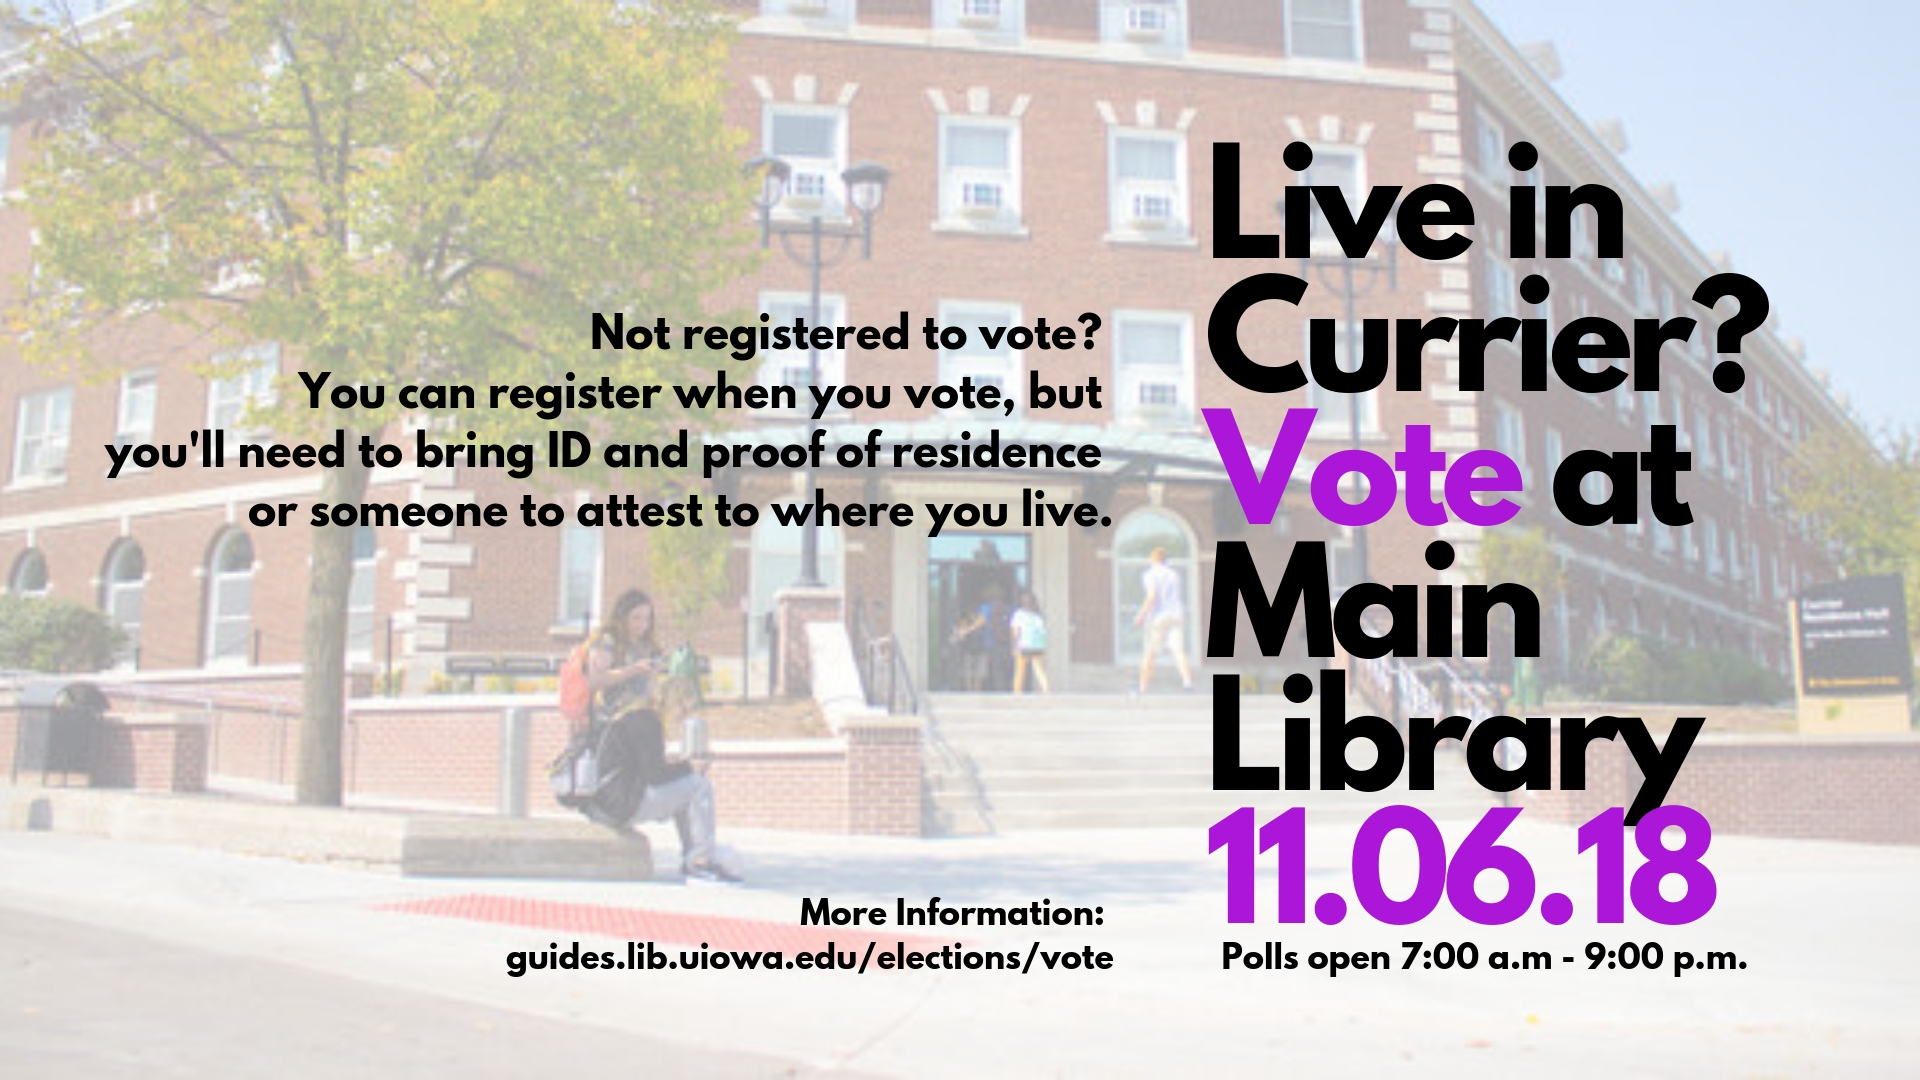 Currier Polling Place is Library